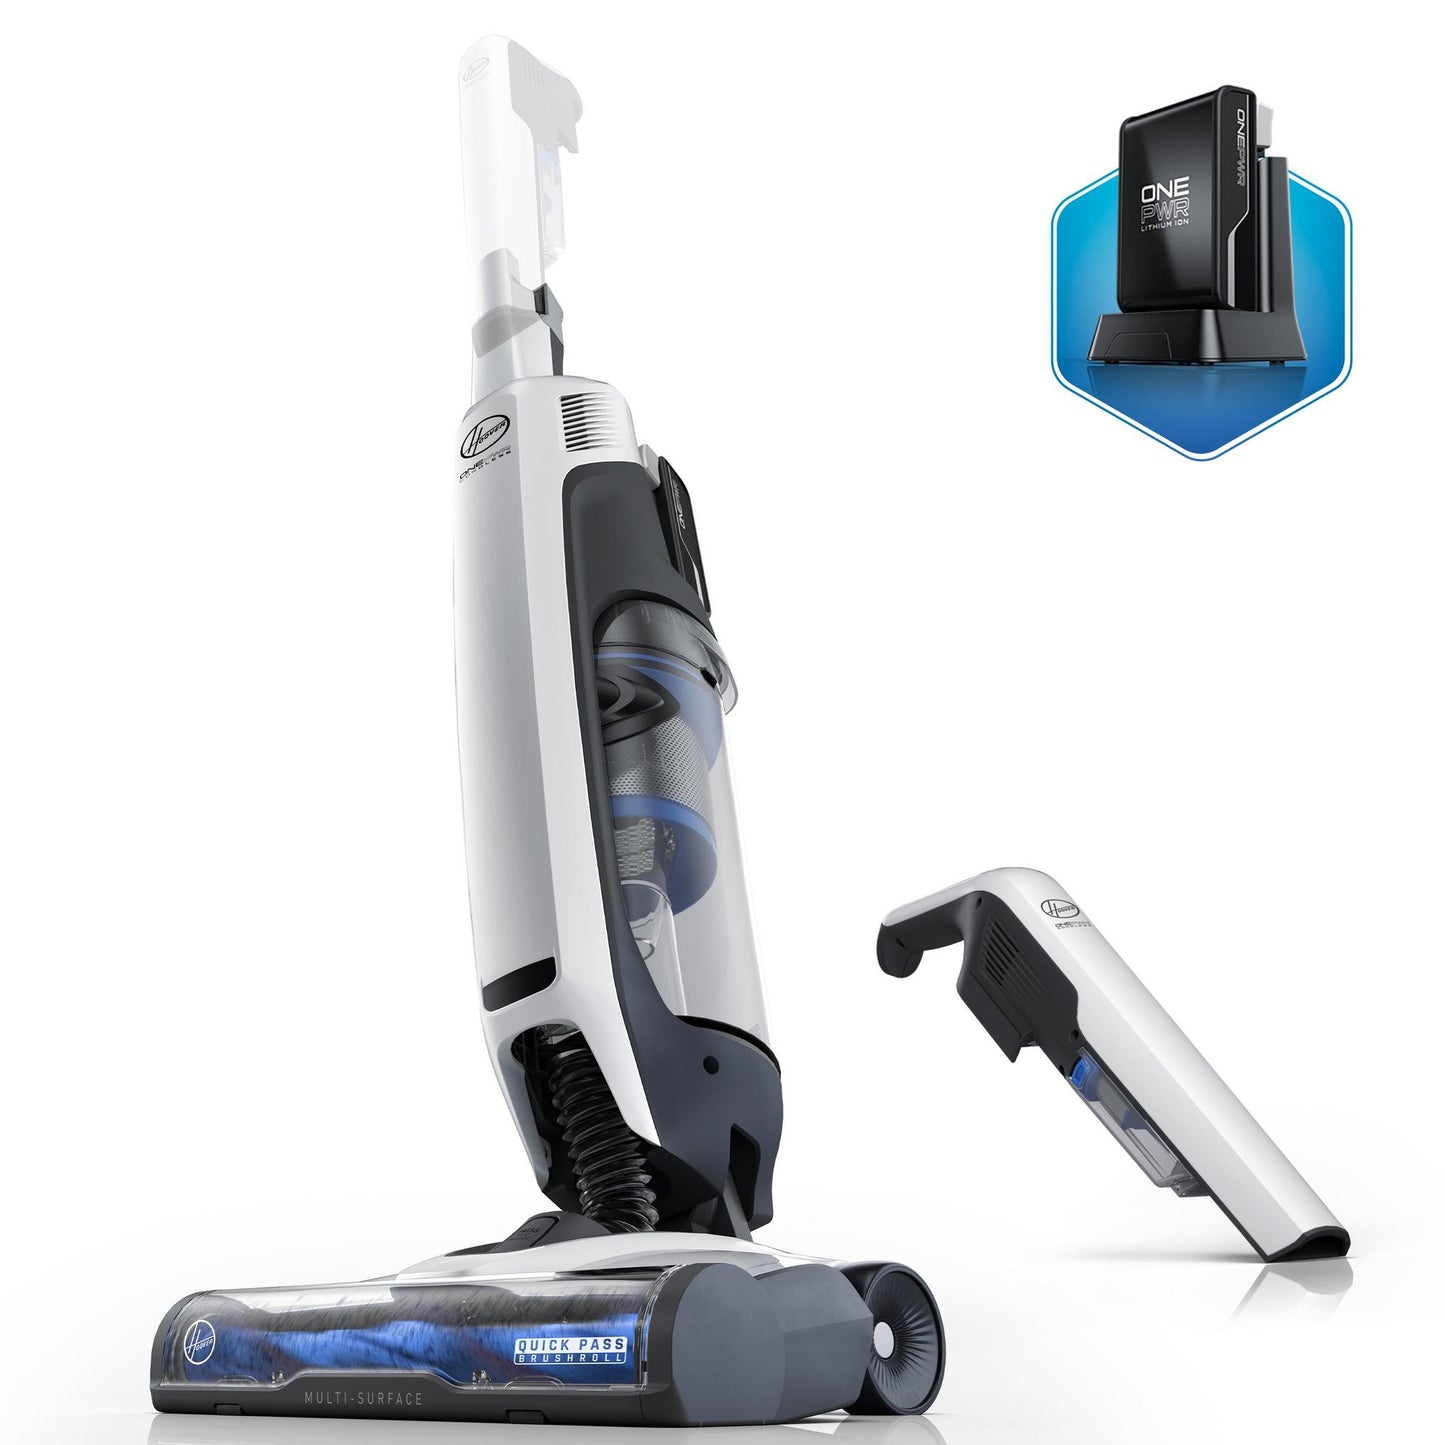 Hoover ONEPWR Evolve Pet Max Cordless Upright Vacuum